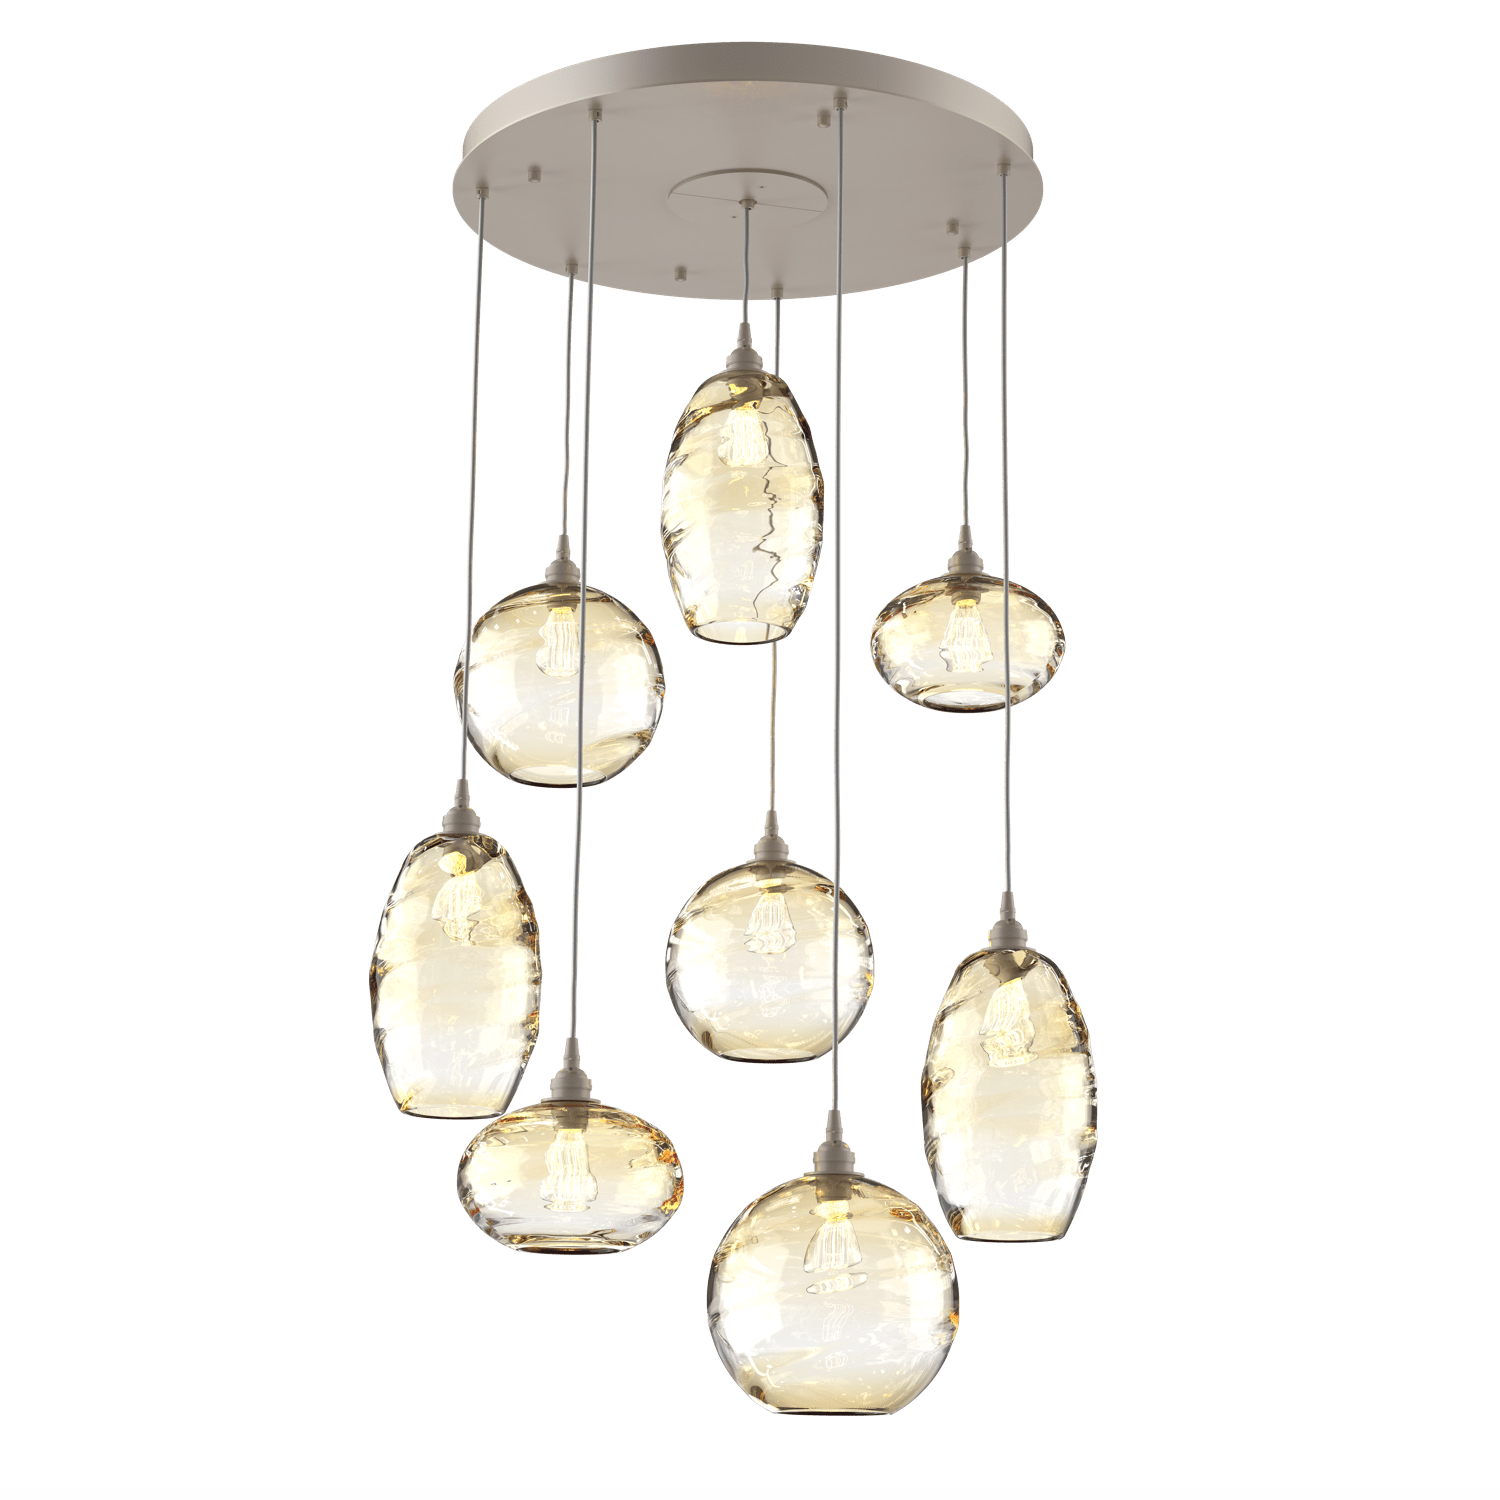 CHB0048-08-BS-OA-Hammerton-Studio-Optic-Blown-Glass-Misto-8-light-round-pendant-chandelier-with-metallic-beige-silver-finish-and-optic-amber-blown-glass-shades-and-incandescent-lamping